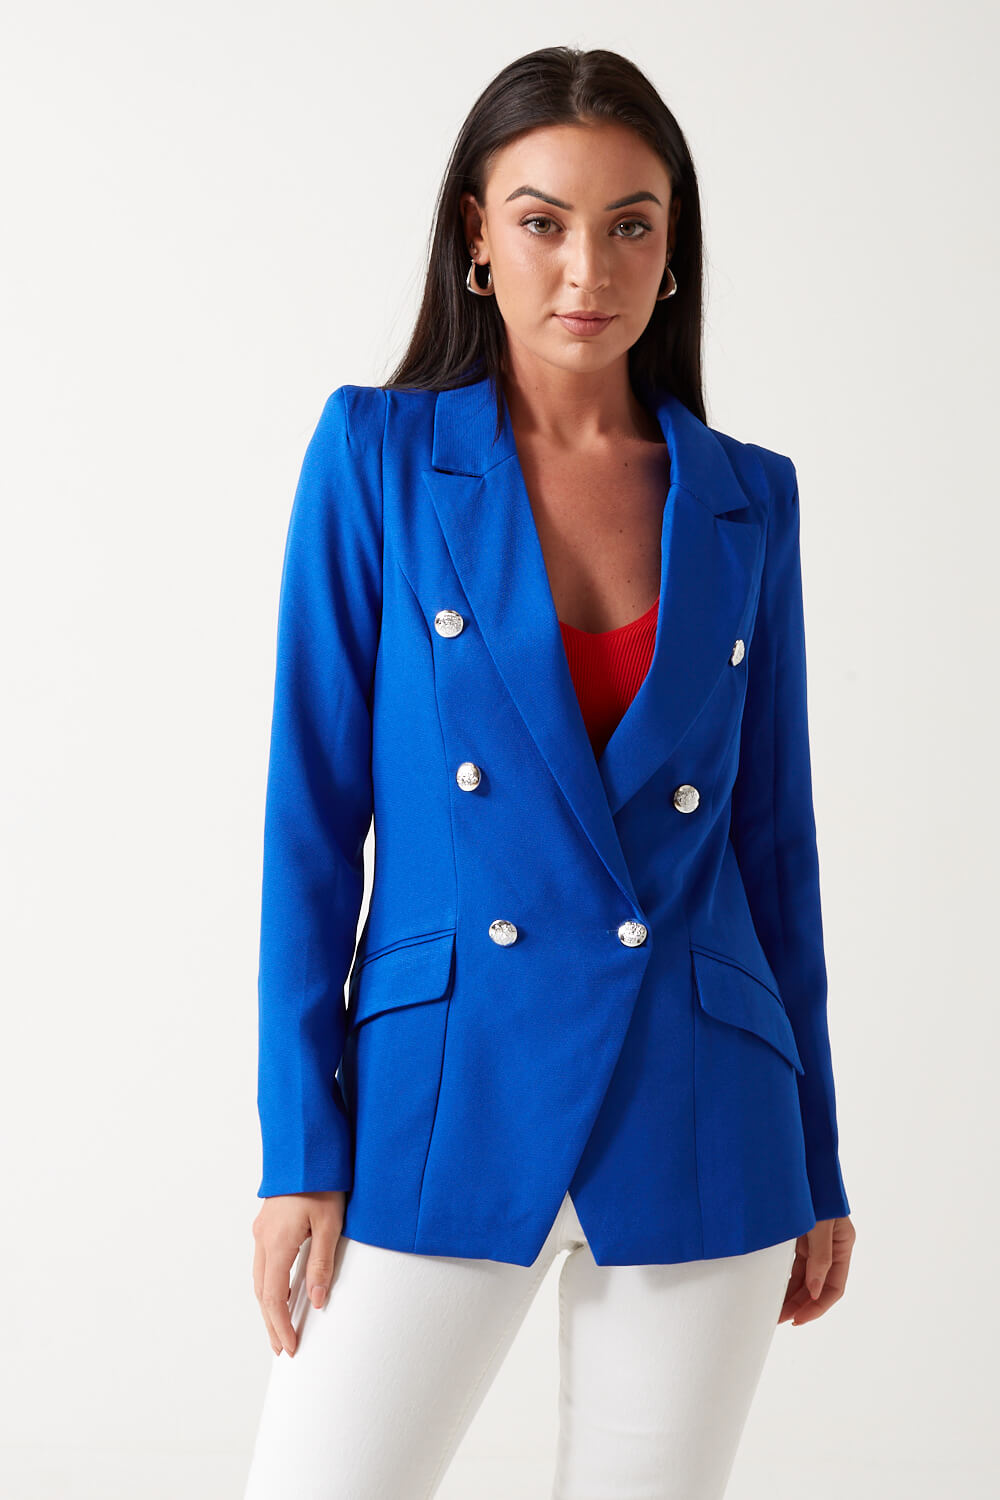 Marc Angelo Tess Military Blazer in Blue | iCLOTHING - iCLOTHING